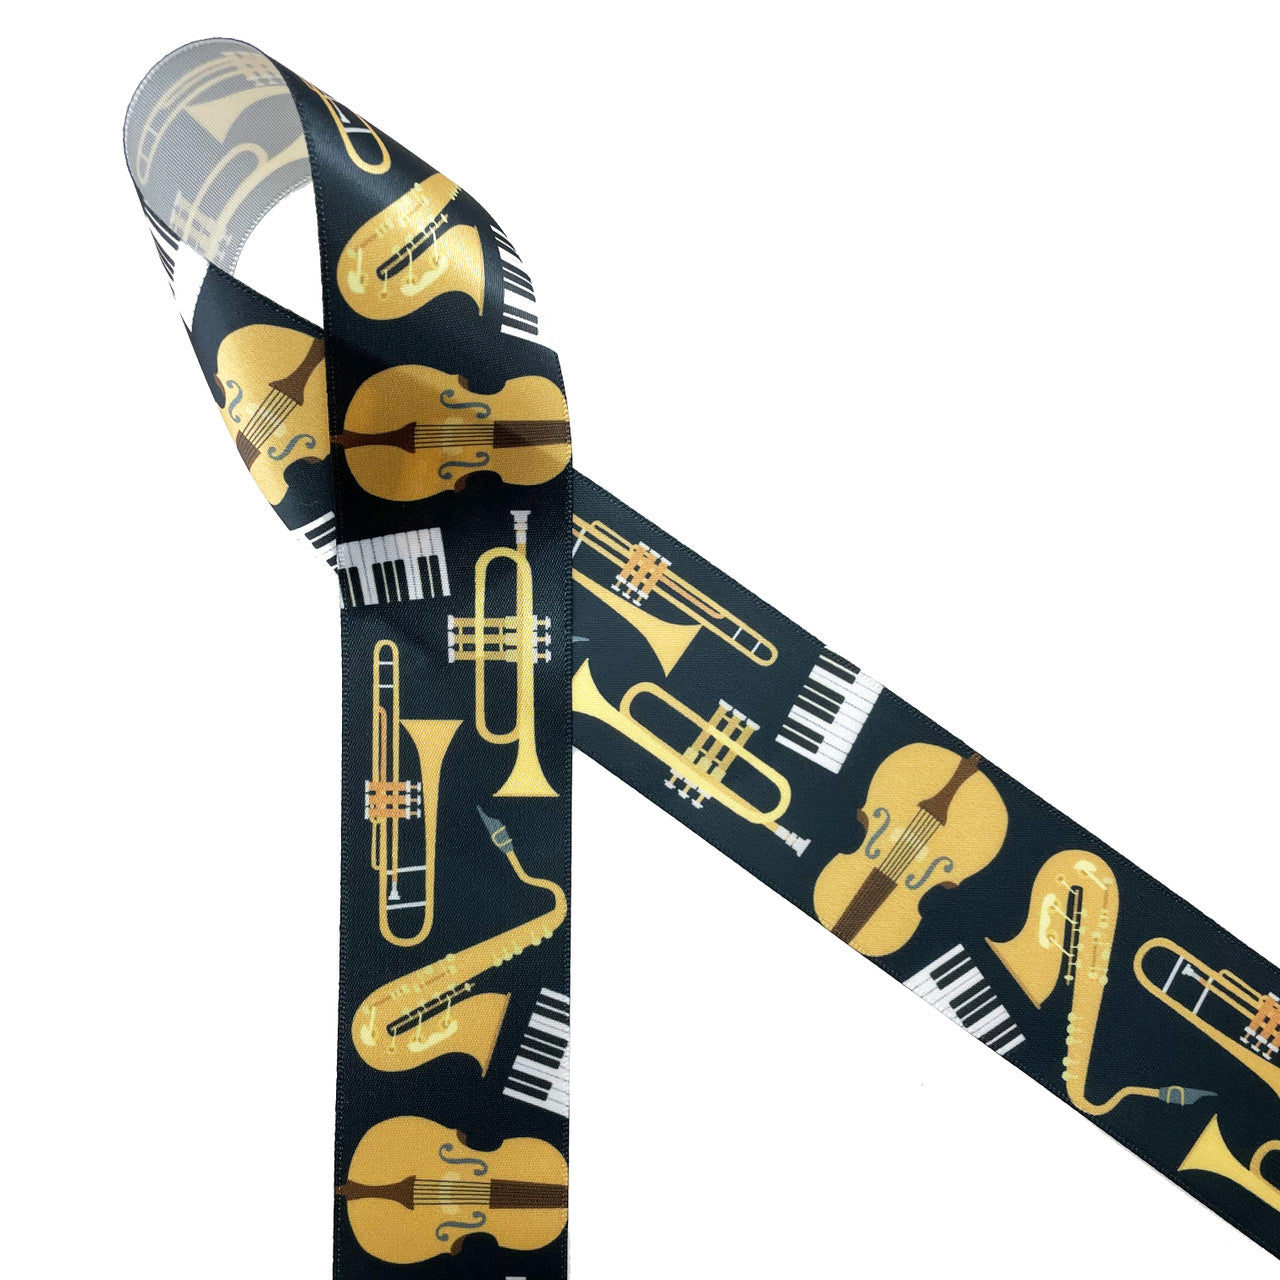 Musical instrument ribbon featuring trumpet, saxophone, keyboard and strings in gold, black and white on a black background printed on 1.5" white single face satin ribbon is an ideal ribbon for all the musicians in your life. This ribbon is great for gift wrap, gift baskets, gift bags, trimming, sewing and quilting projects. Use this ribbon for musical themed crafts, wreaths and tree trimming too! All our ribbon is designed and printed in the USA